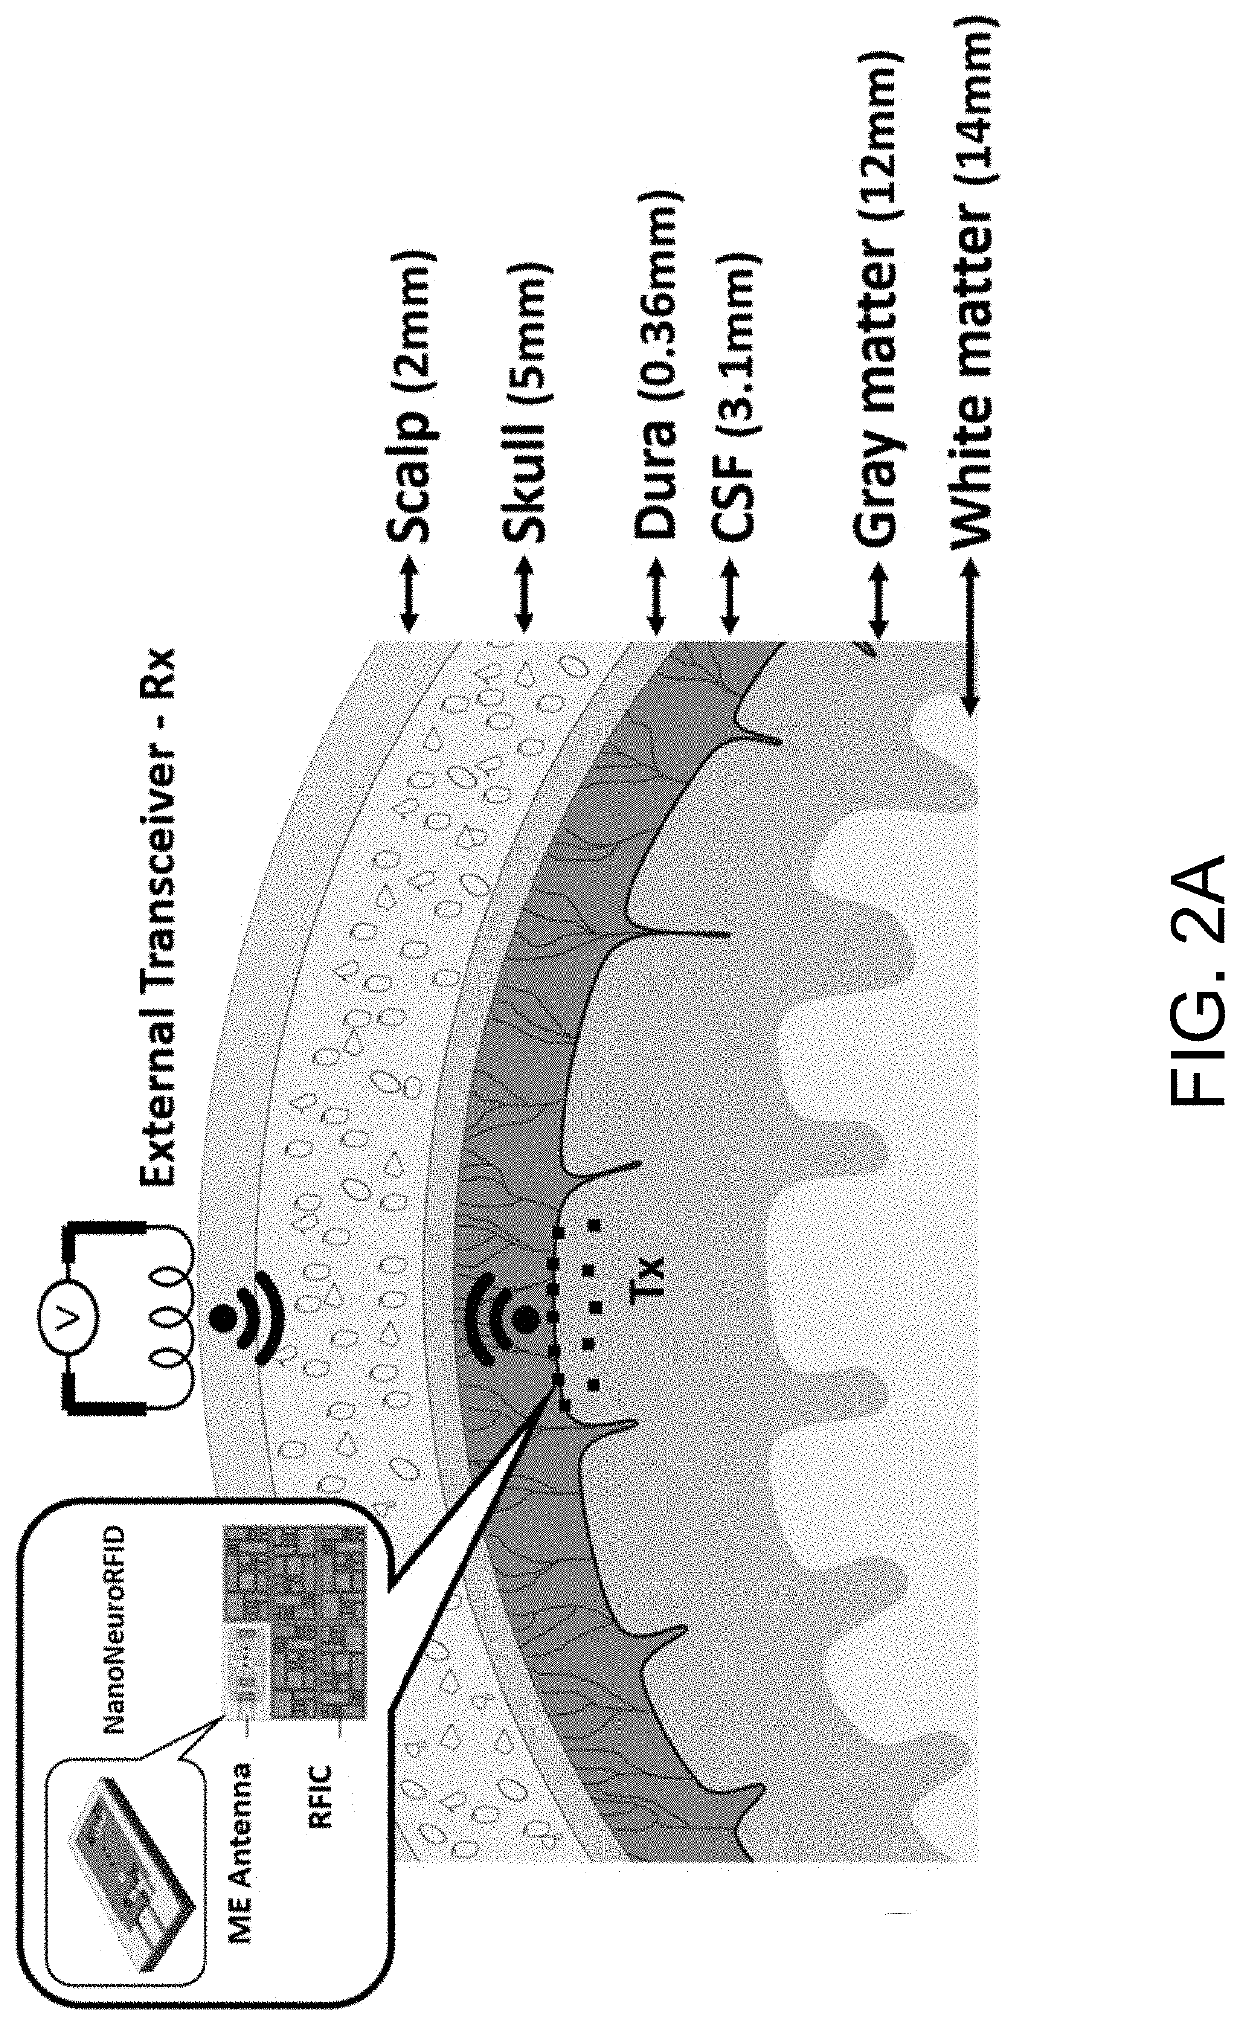 Implantable Devices Based on Magnetoelectric Antenna, Energy Harvesting and Communication